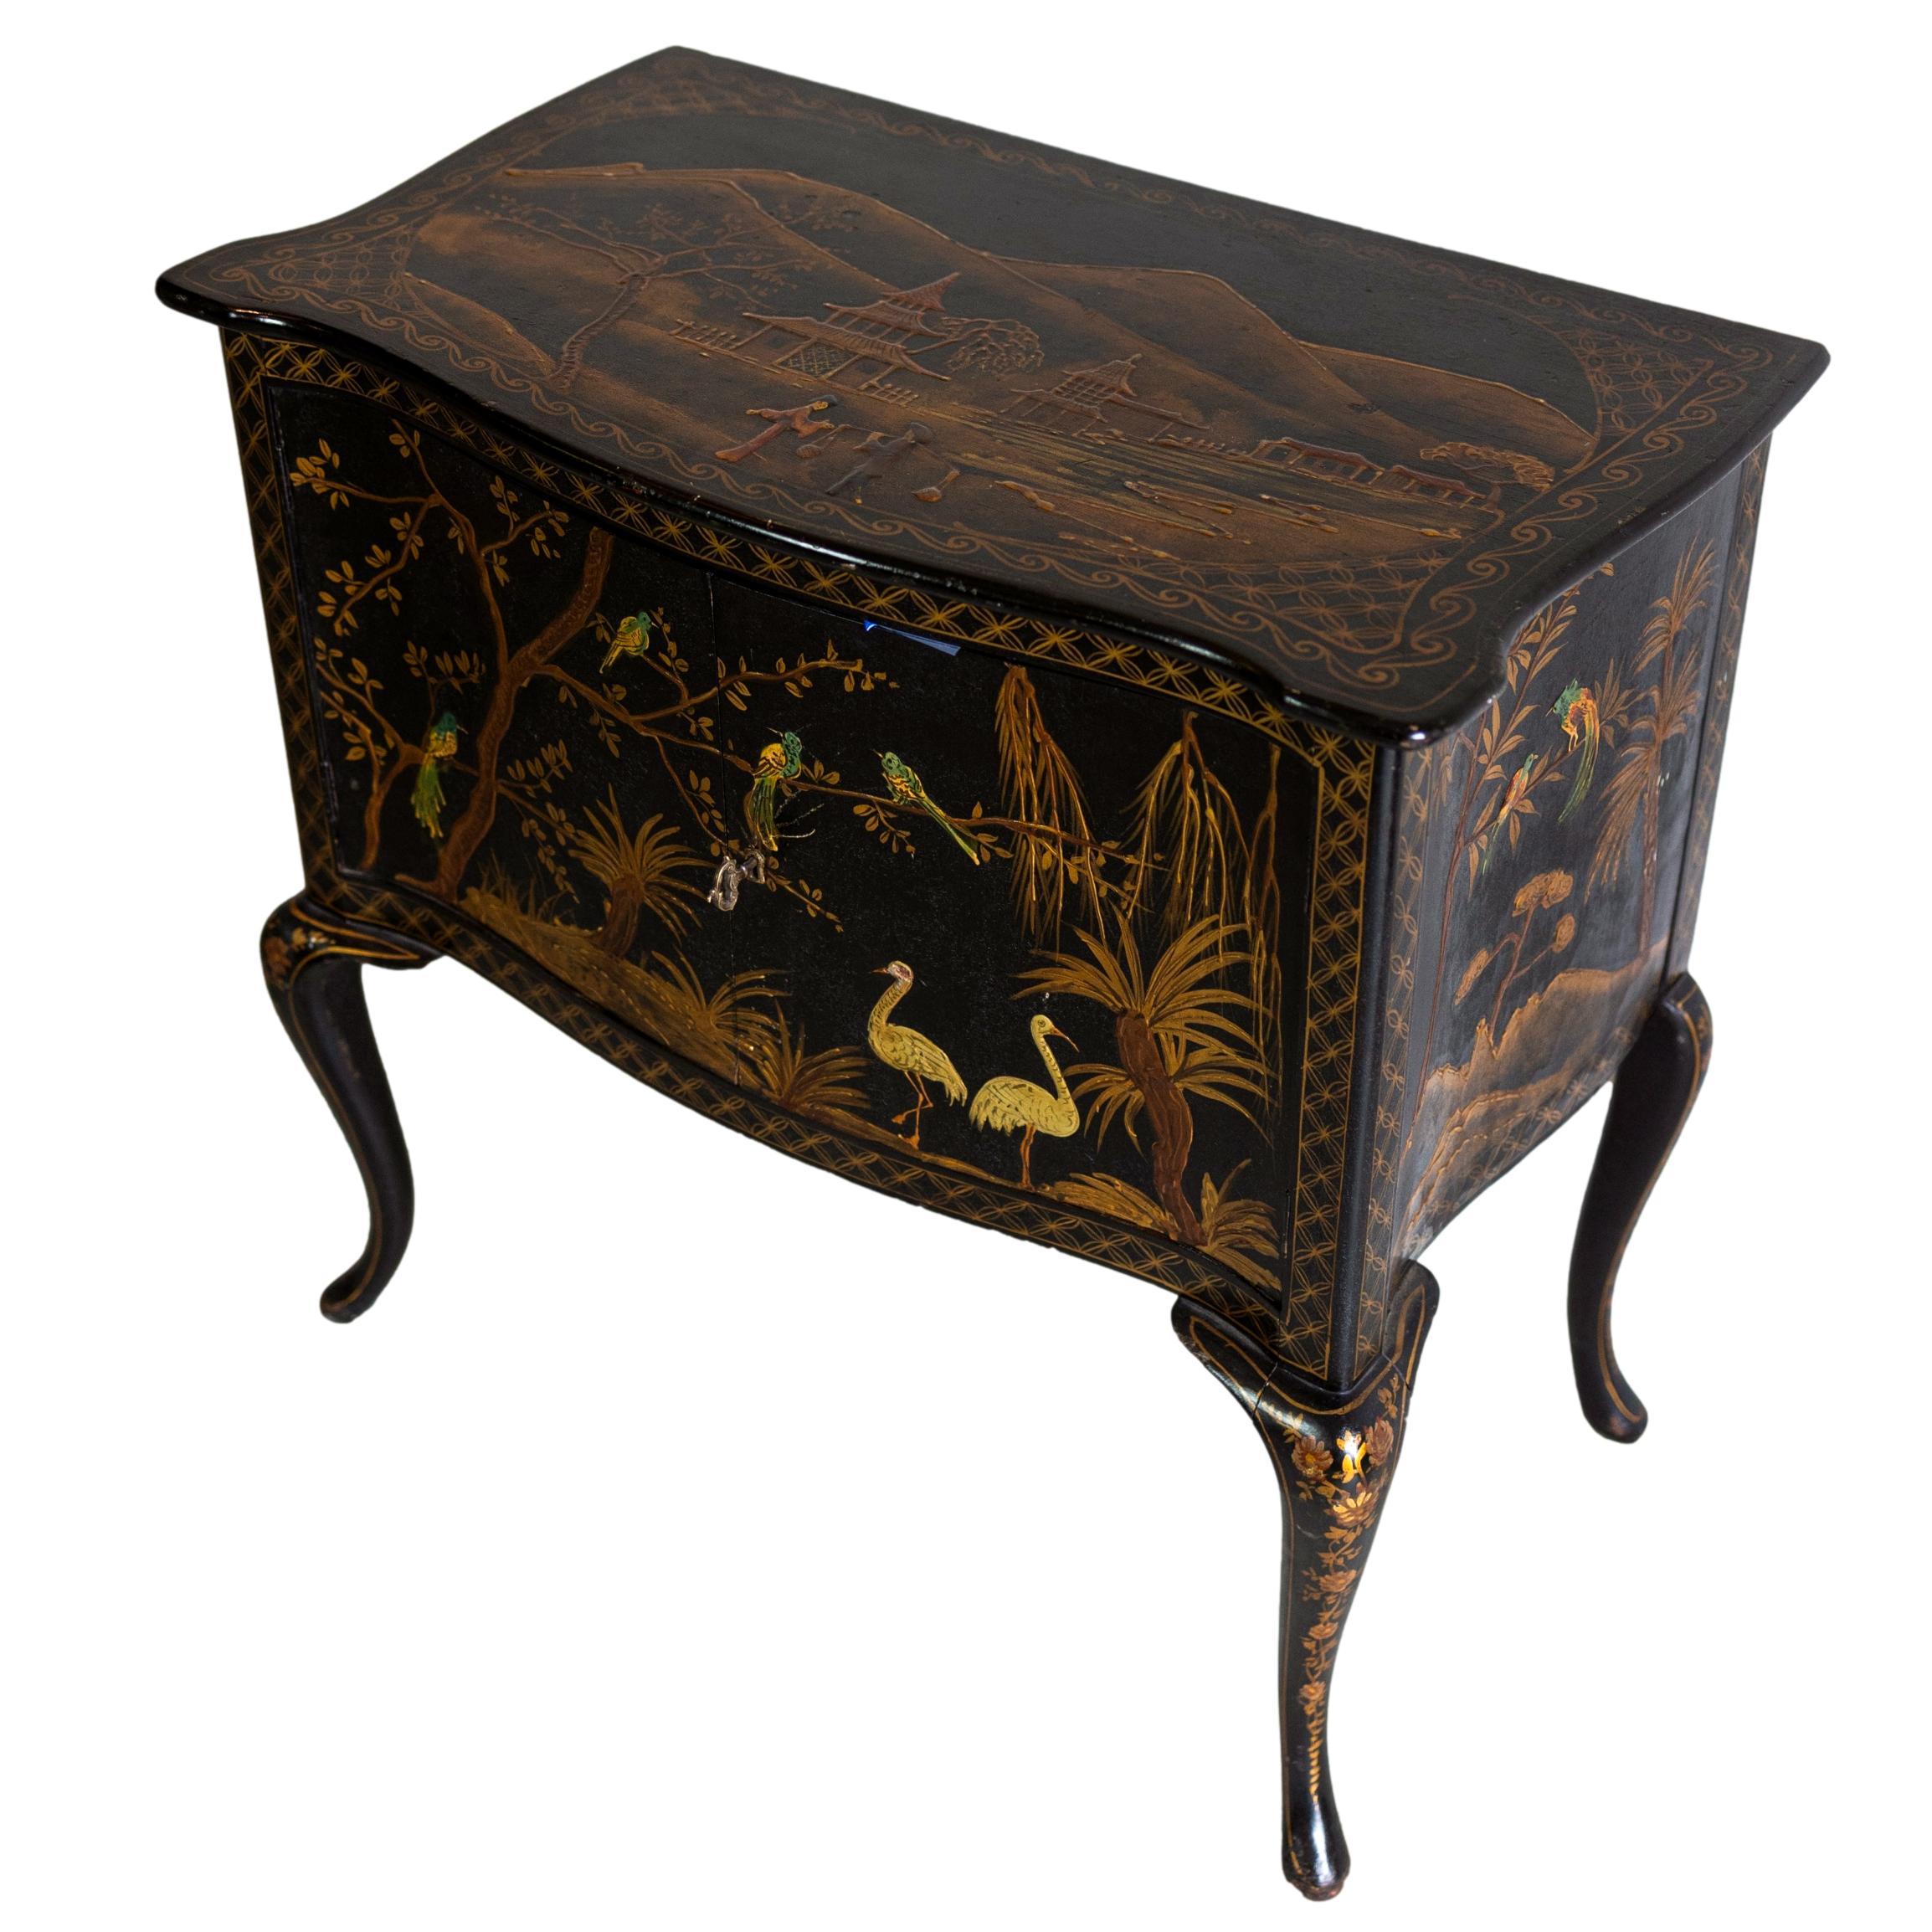 Softwood Black Lacquered and Chinoiserie-Decorated Serpentine Cabinet, English, c. 1875